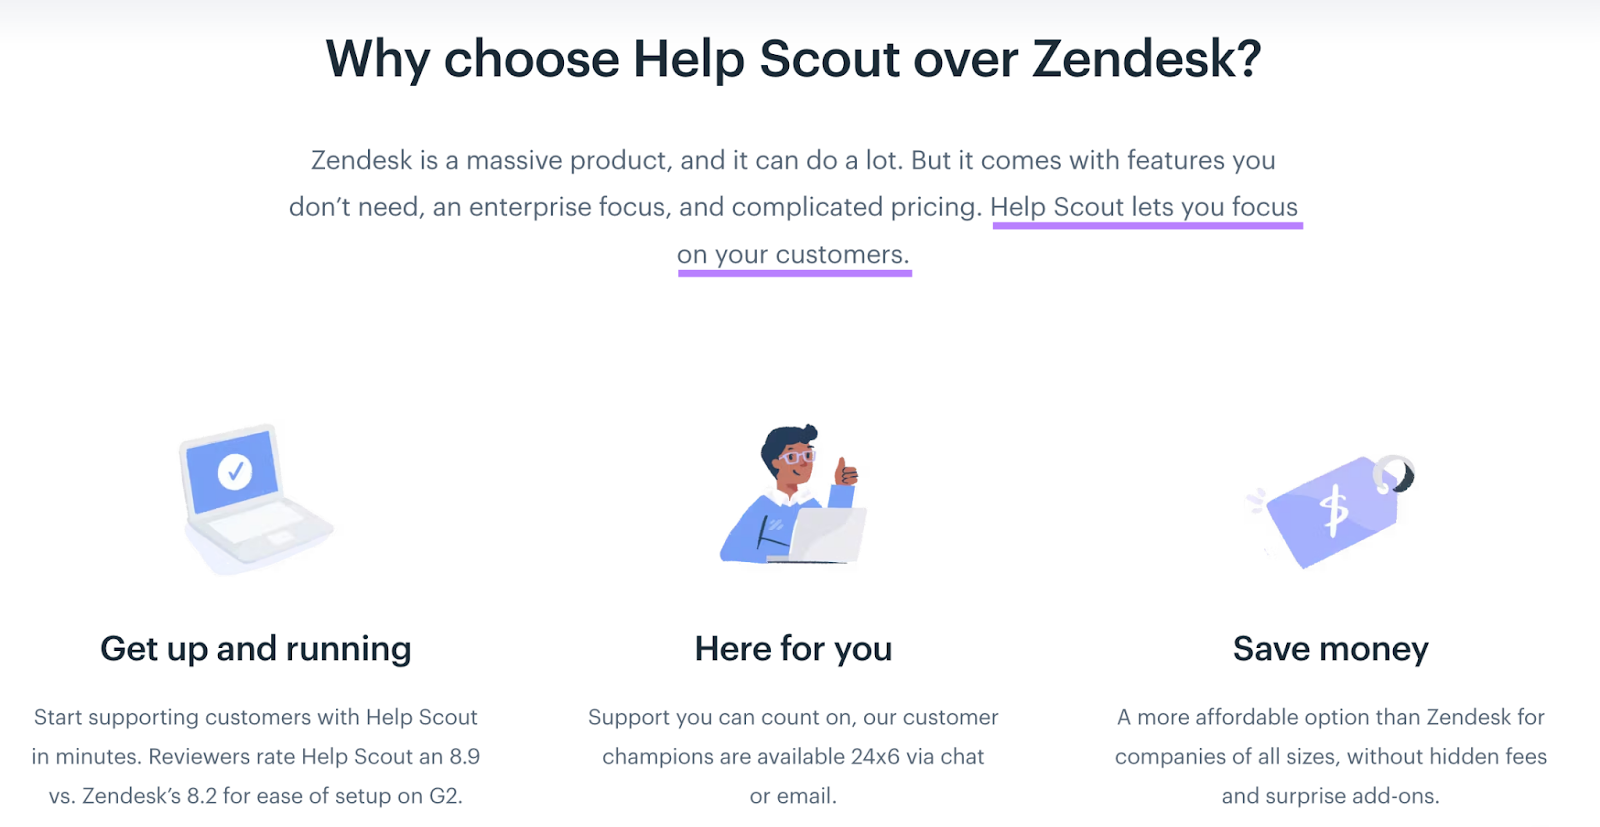 "Why choose Help Scout over Zendesk?" section on Help Scout's website